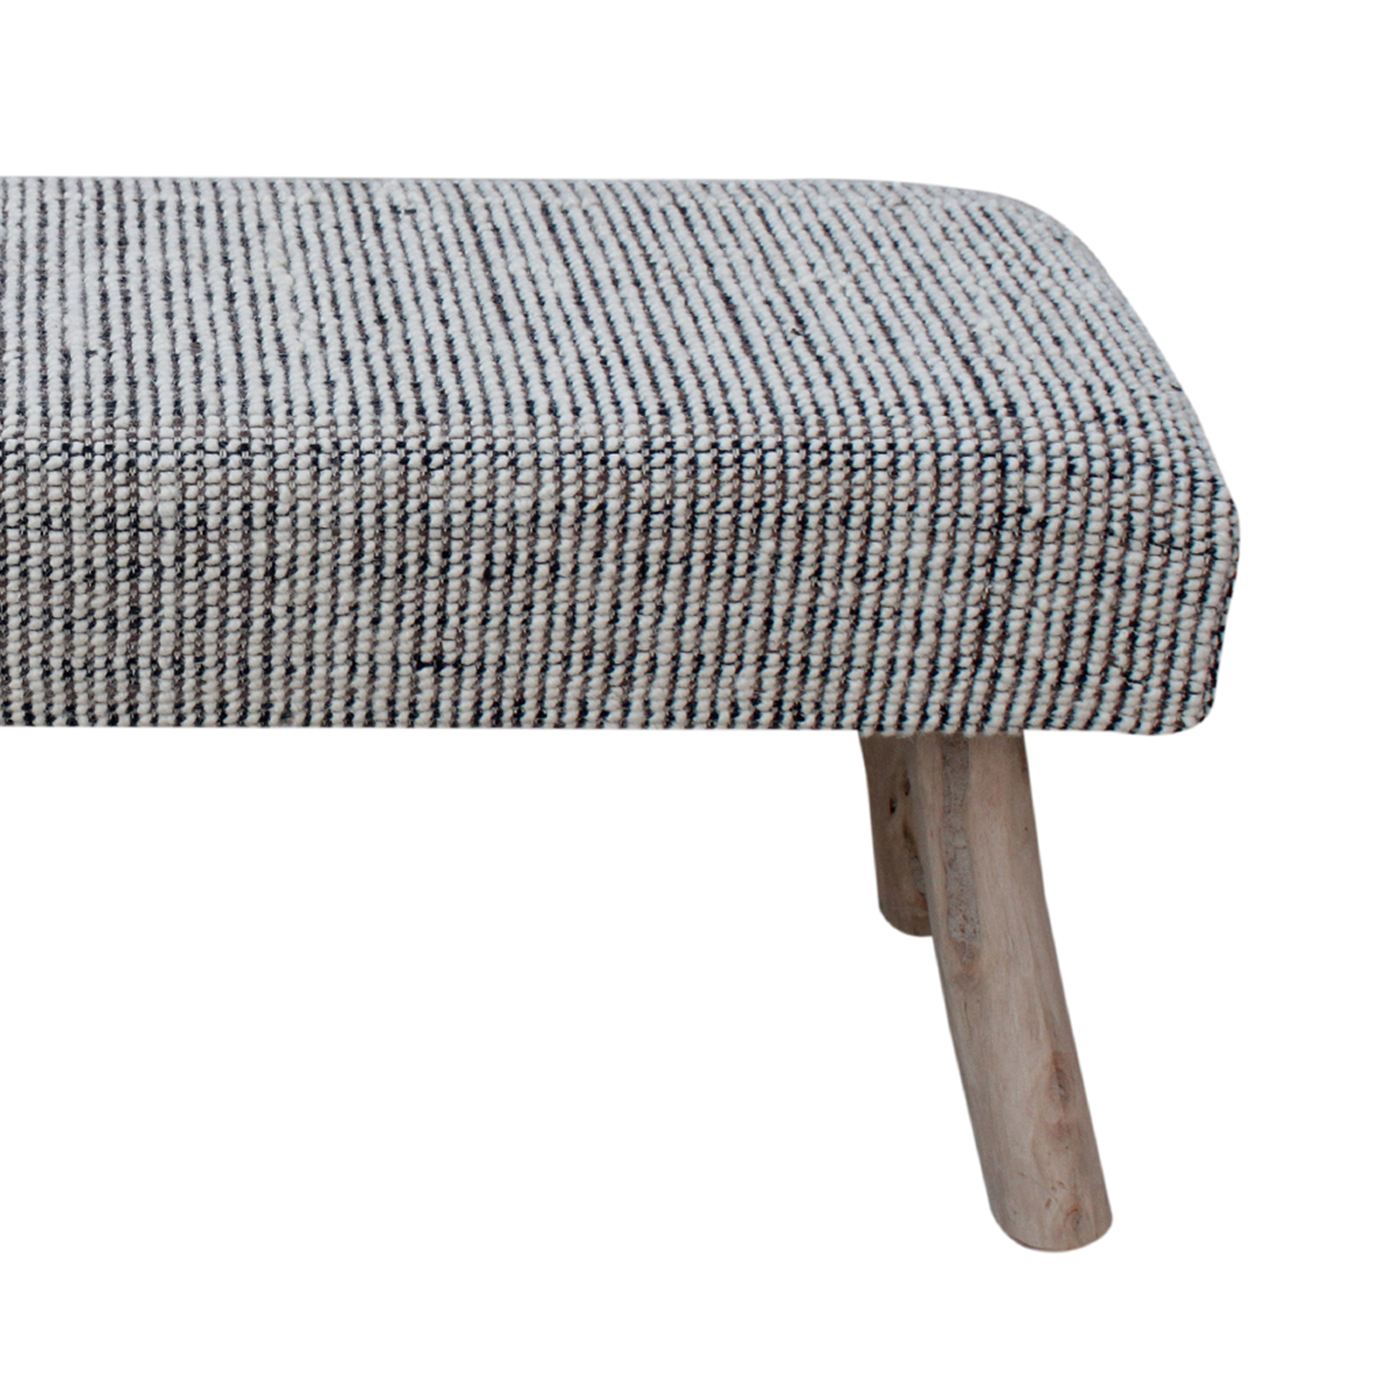 Kenfig Bench, Wool, Polyester, Natural White, Grey, Hand woven, All Loop